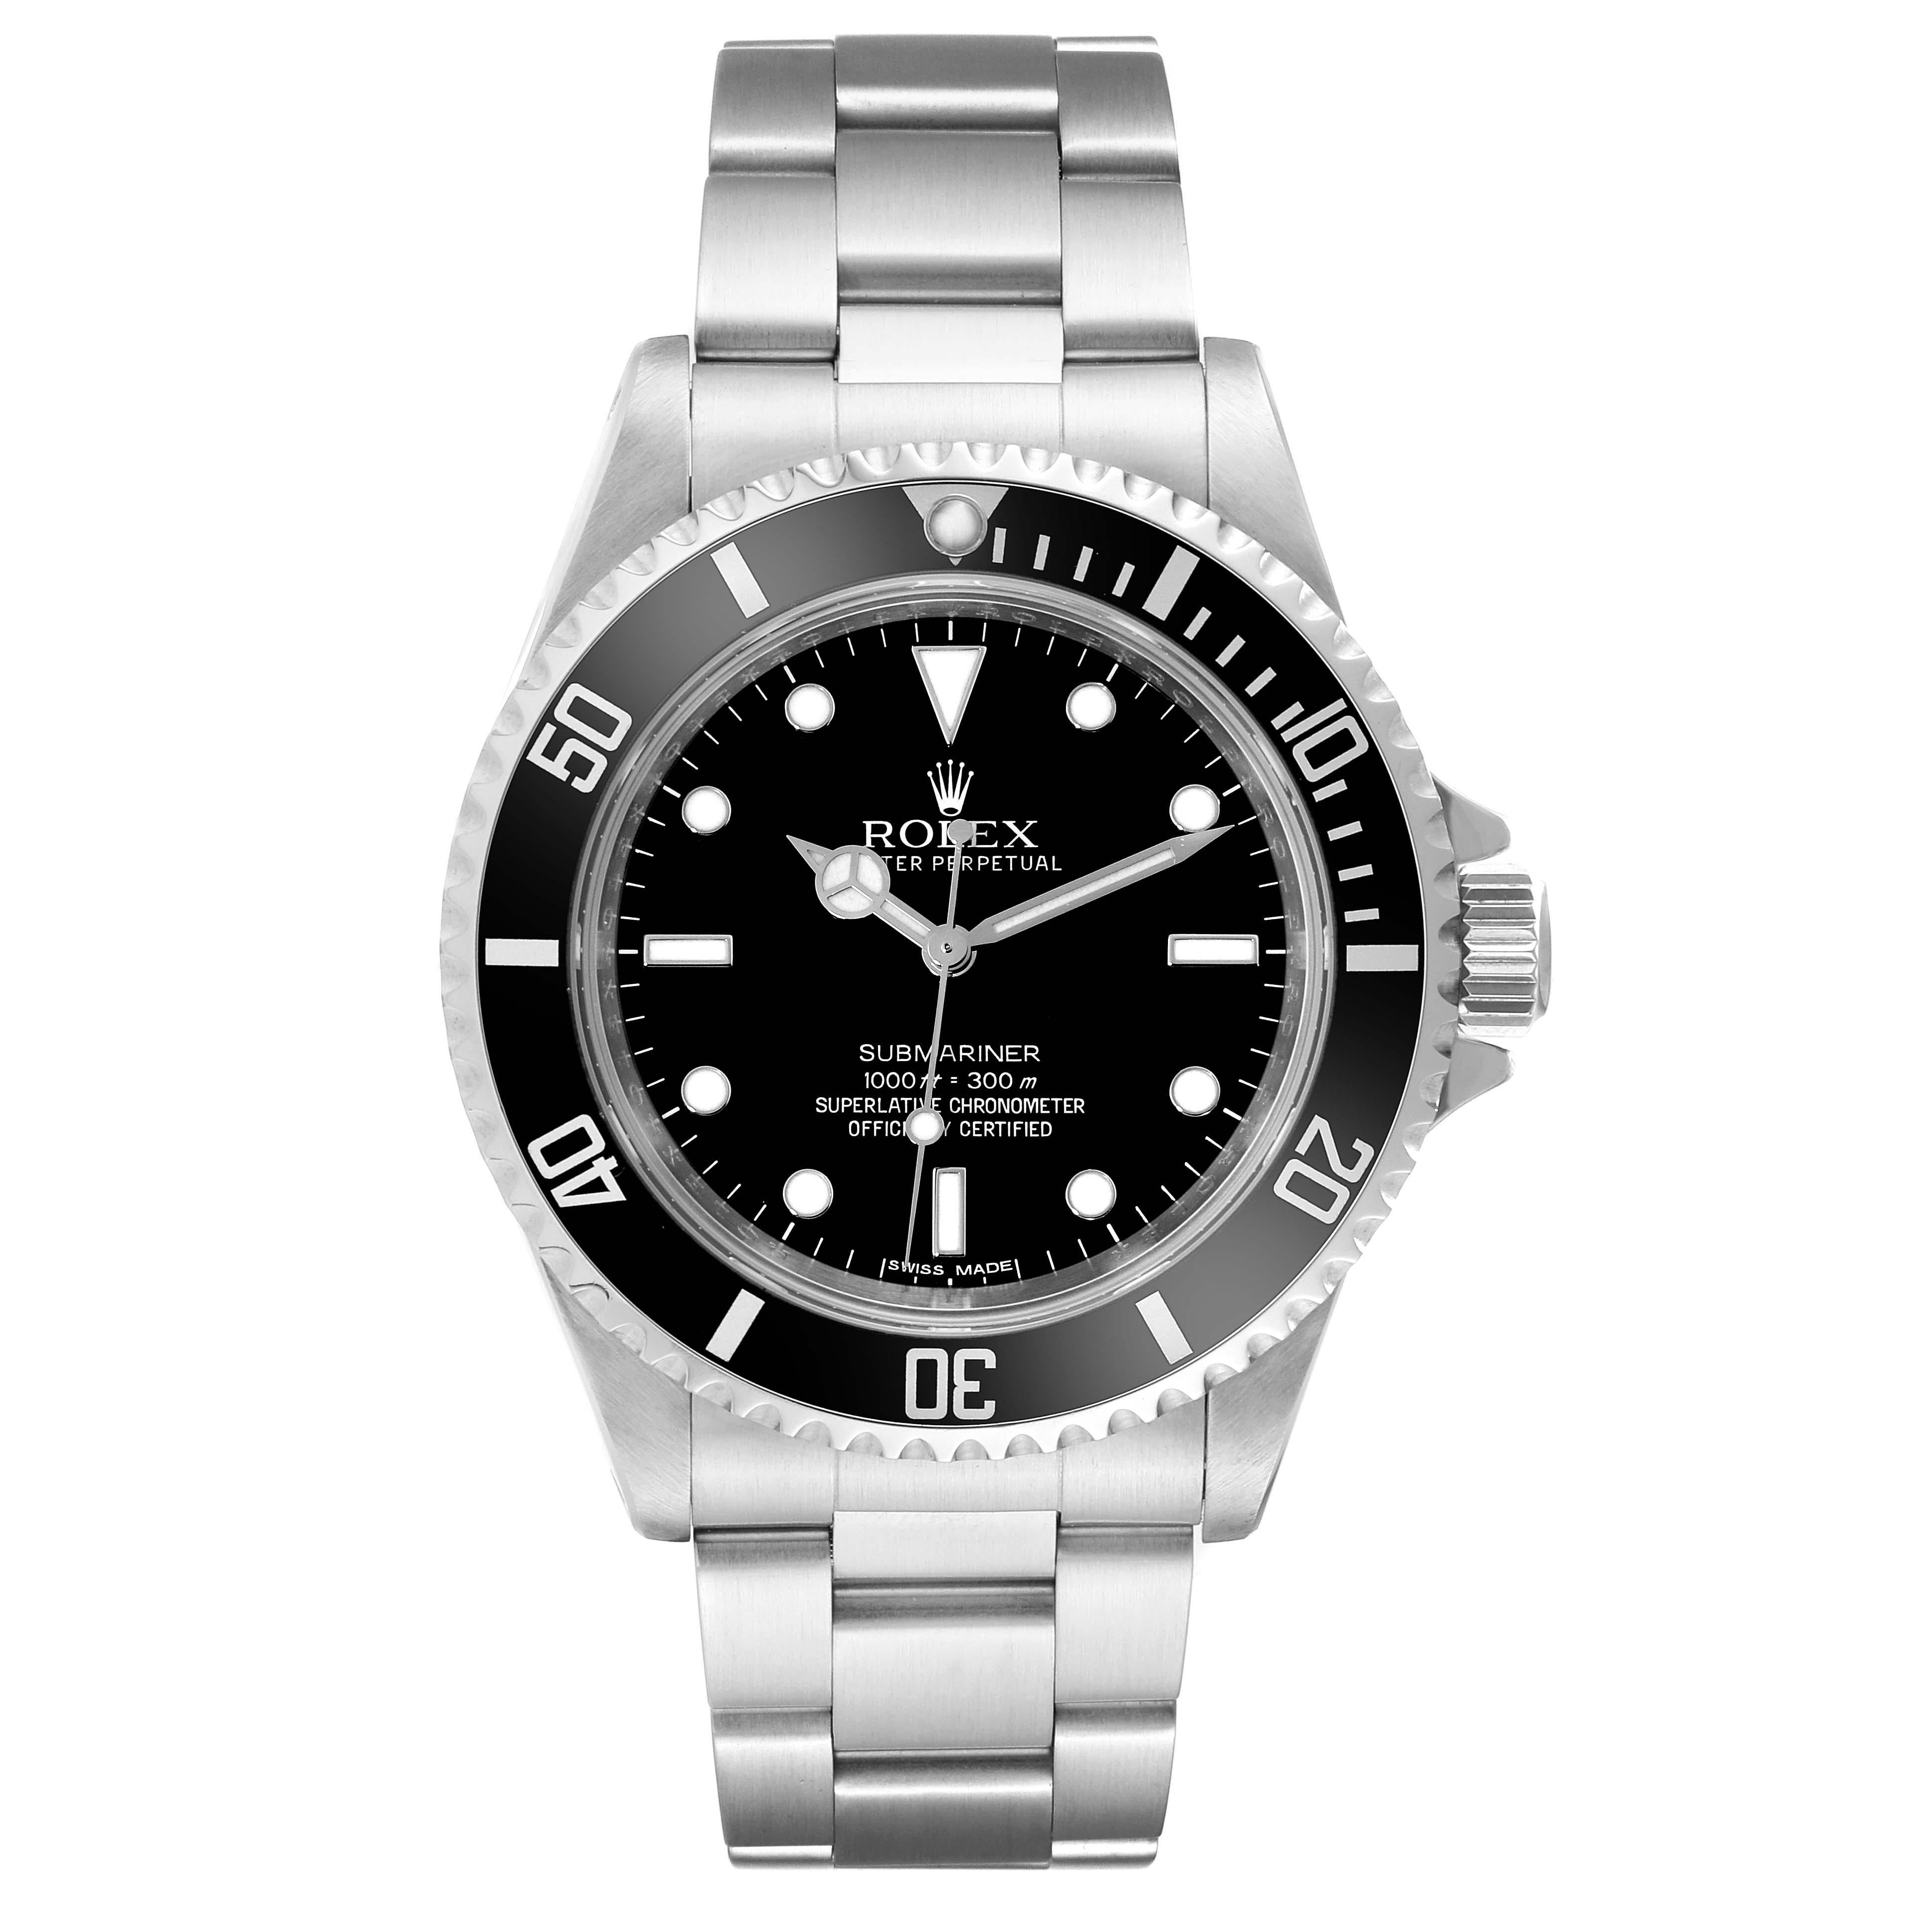 Rolex Submariner No Date 40mm 4 Liner Steel Mens Watch 14060. Officially certified chronometer automatic self-winding movement. Stainless steel case 40.0 mm in diameter. Rolex logo on the crown. Special time-lapse unidirectional rotating bezel.